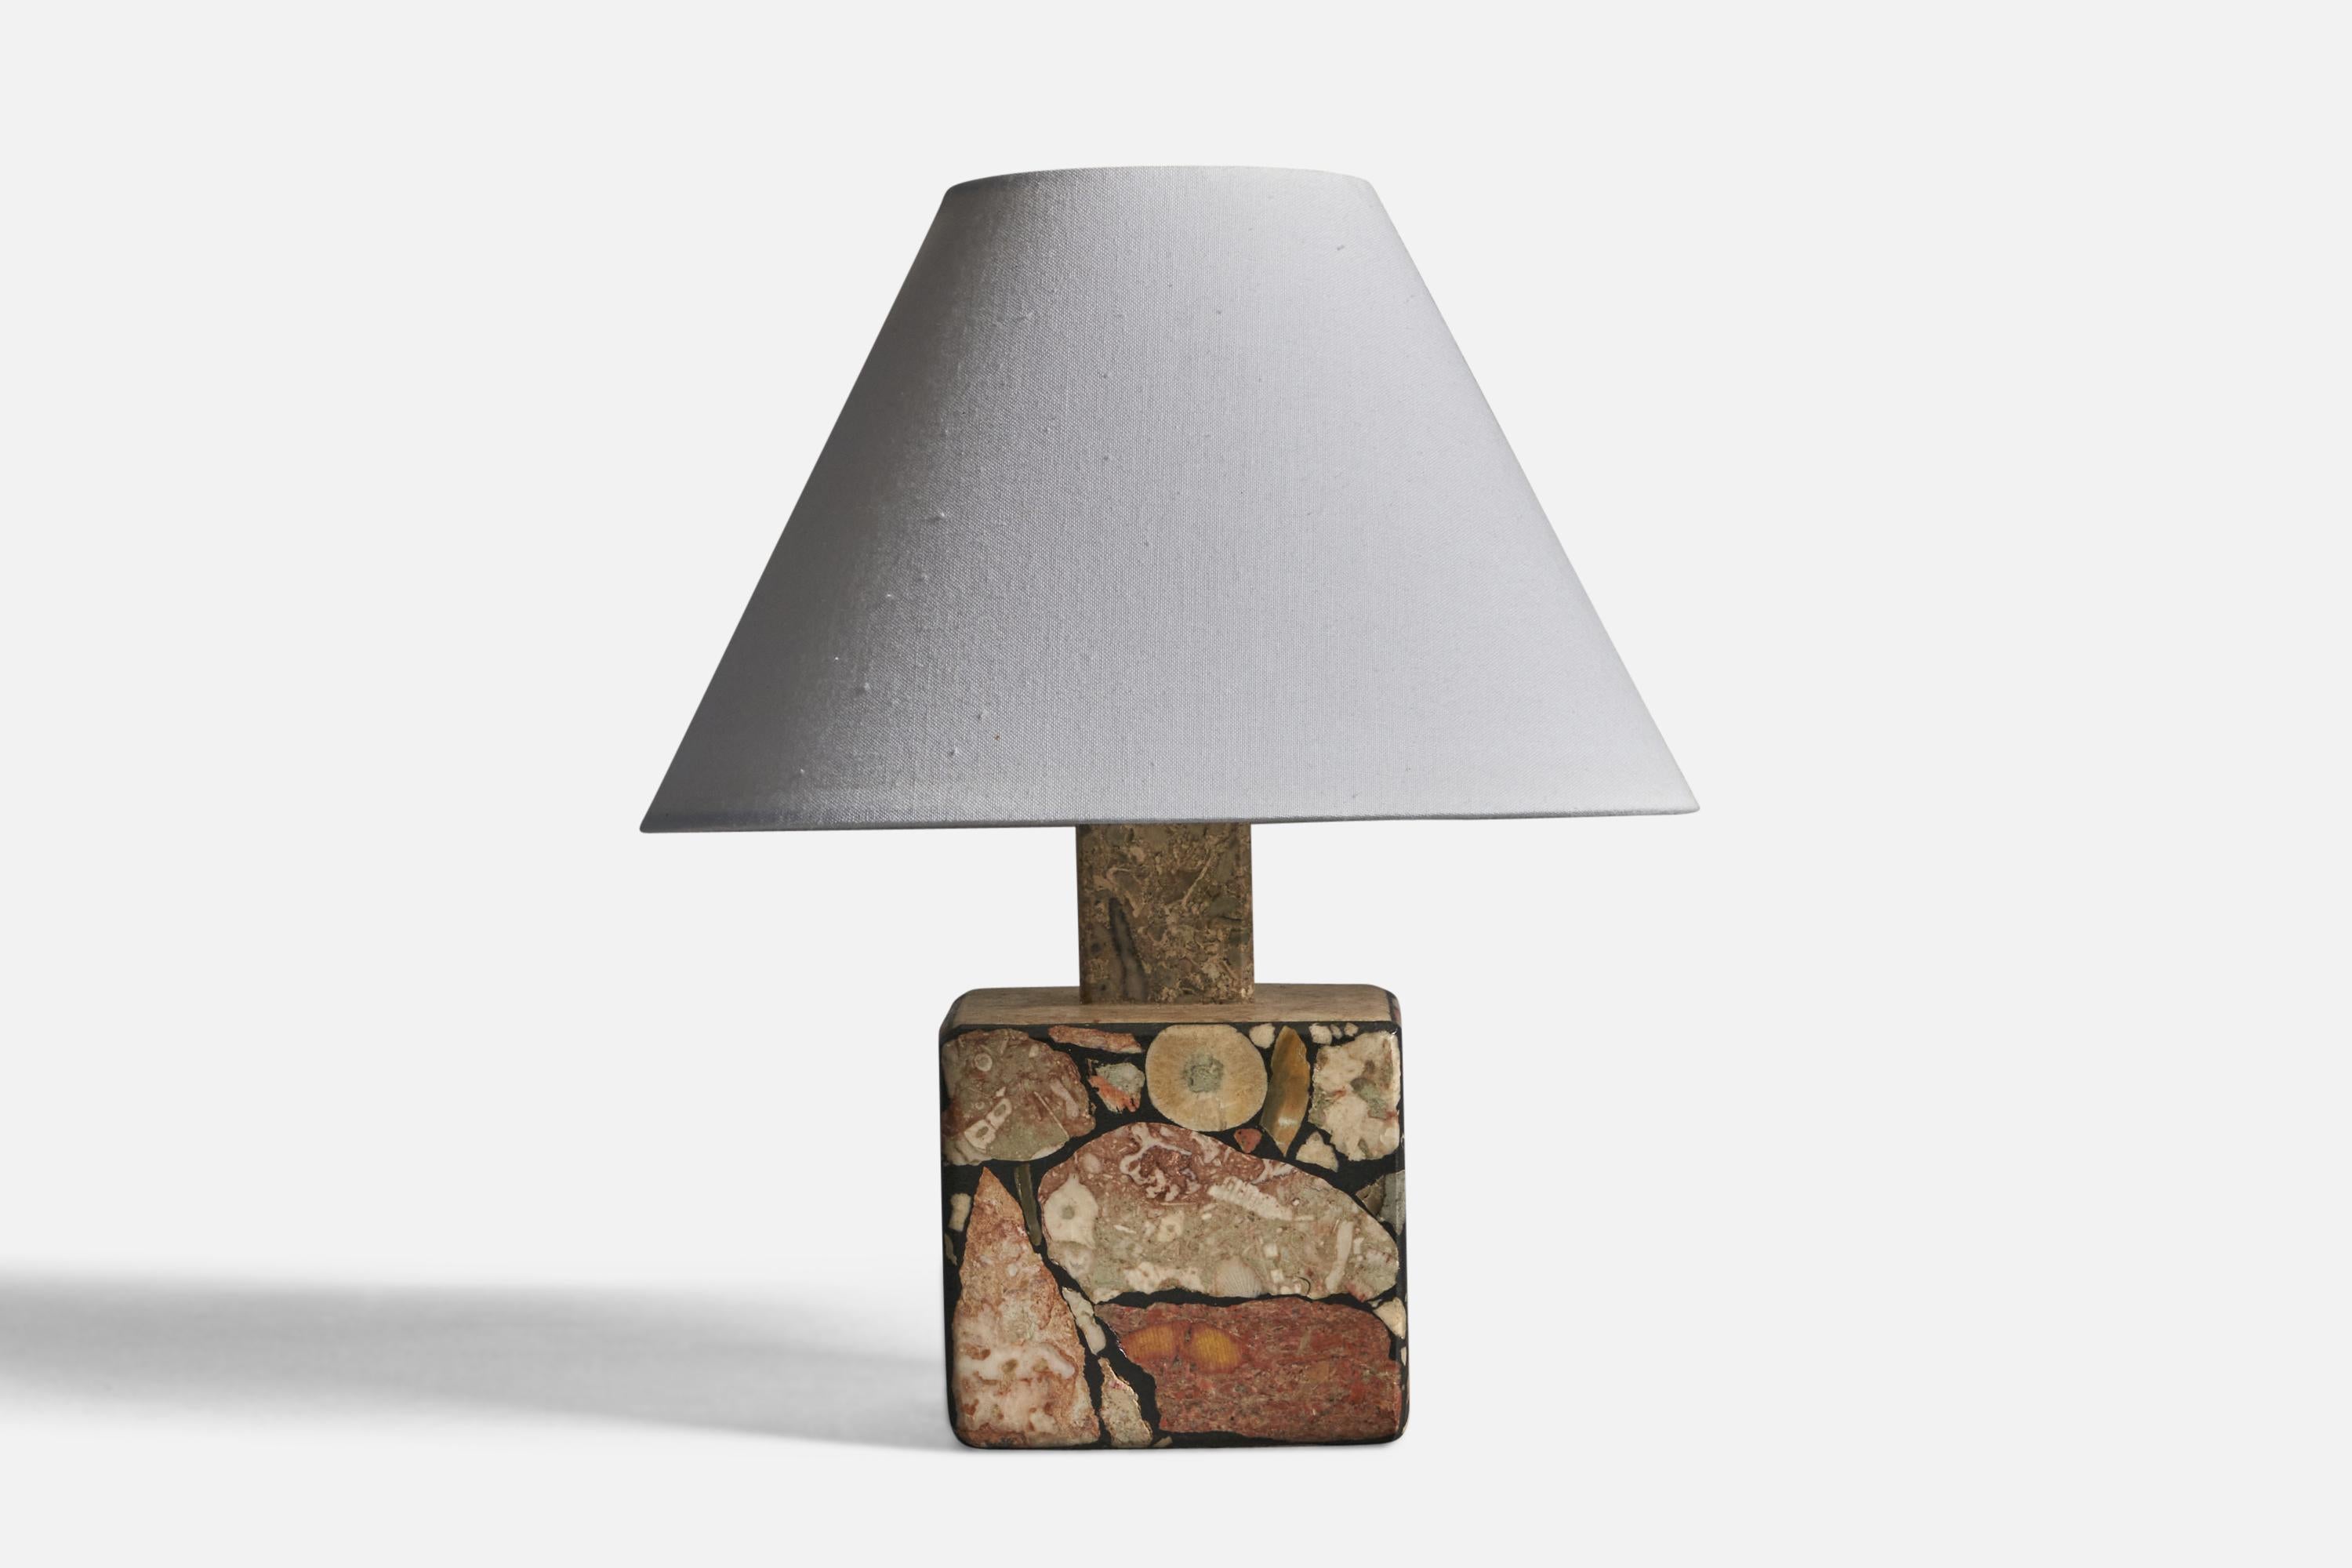 A fossil stone table lamp designed and produced in Gotland, Sweden, 1970s.

Dimensions of Lamp (inches): 7.15